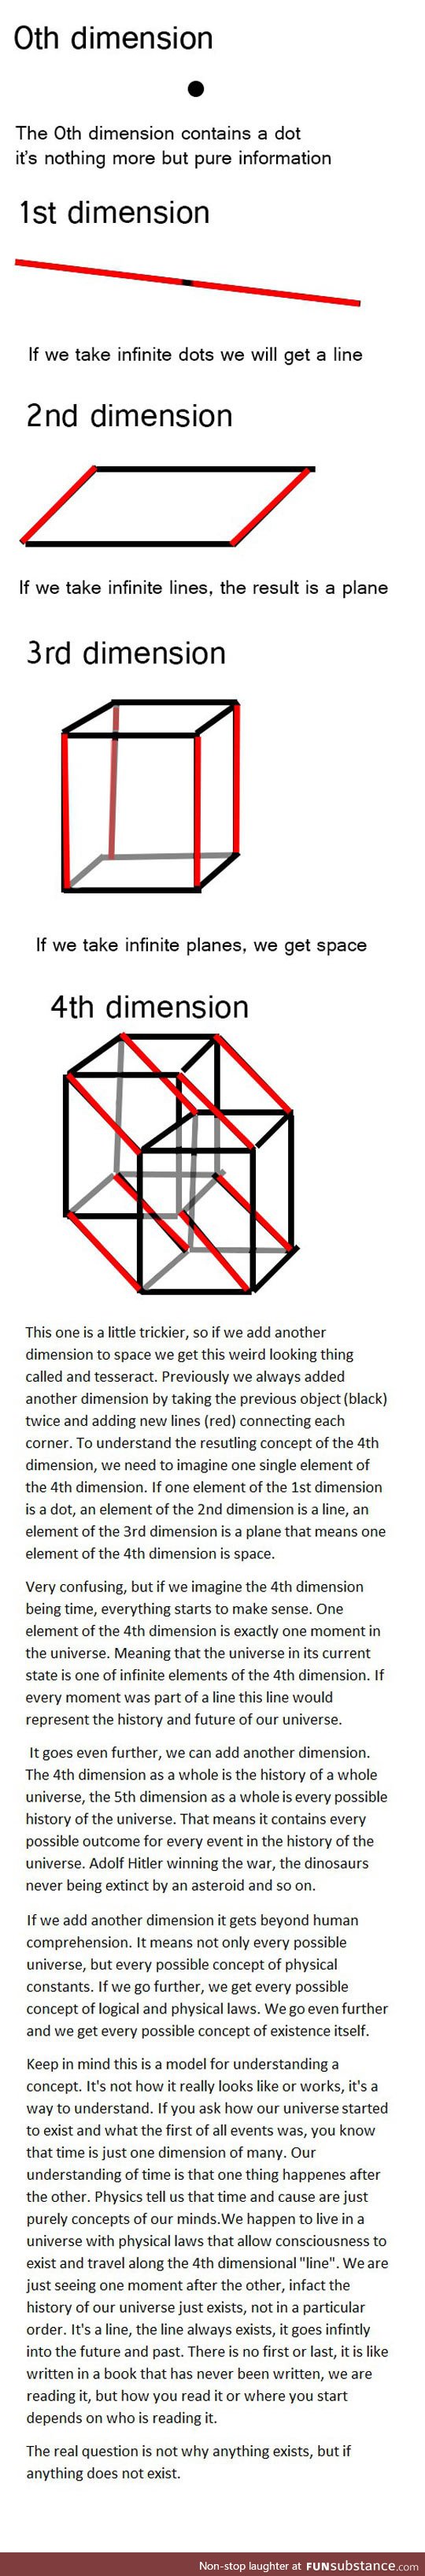 An easy way to understand dimensions